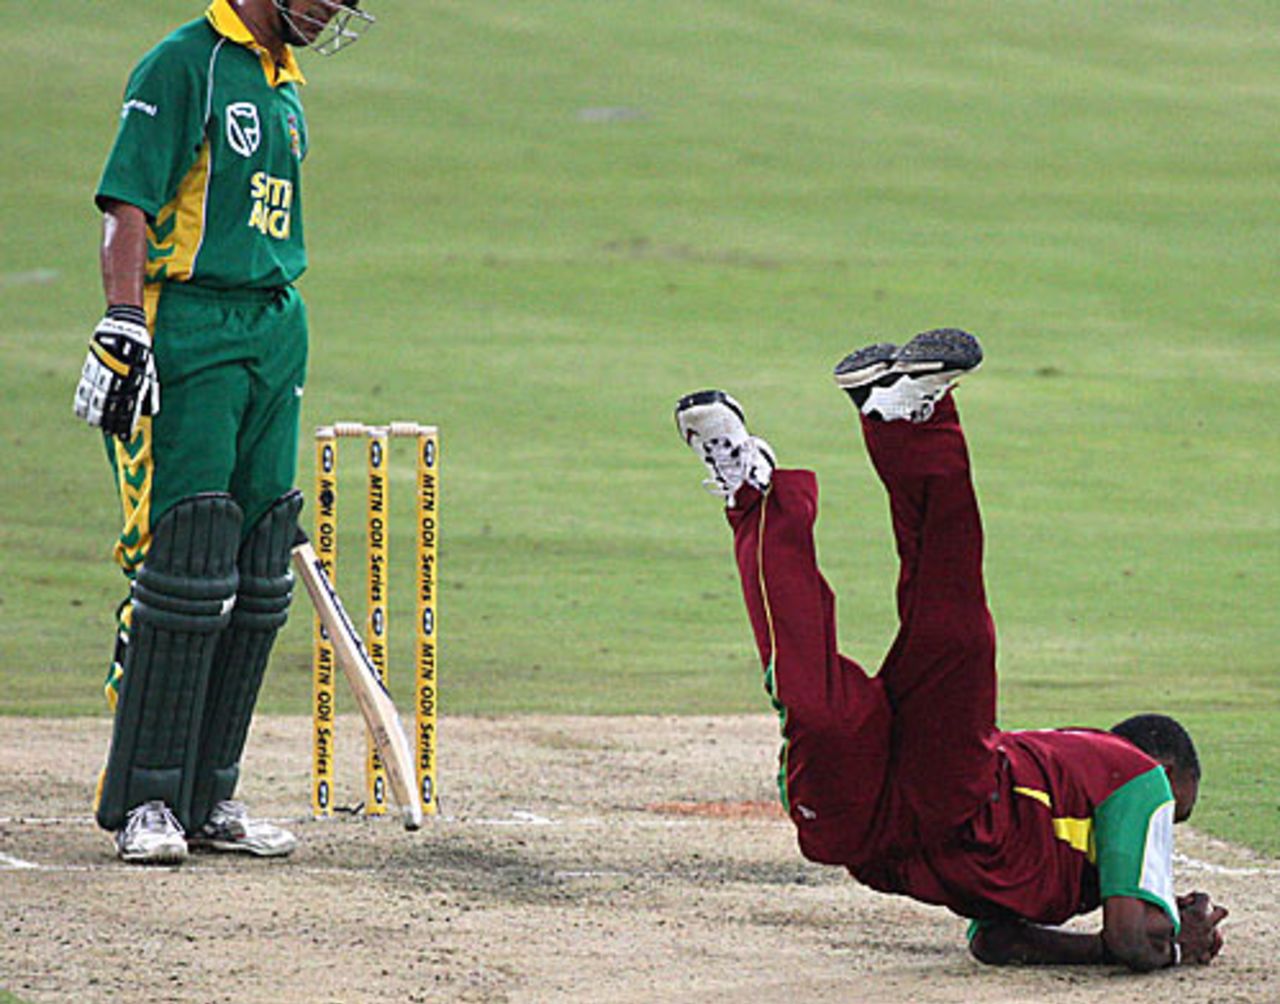 Dwayne Bravo took a spectacular diving catch to dismiss Justin Ontong, South Africa v West Indies, 1st ODI, Centurion, January 20, 2008